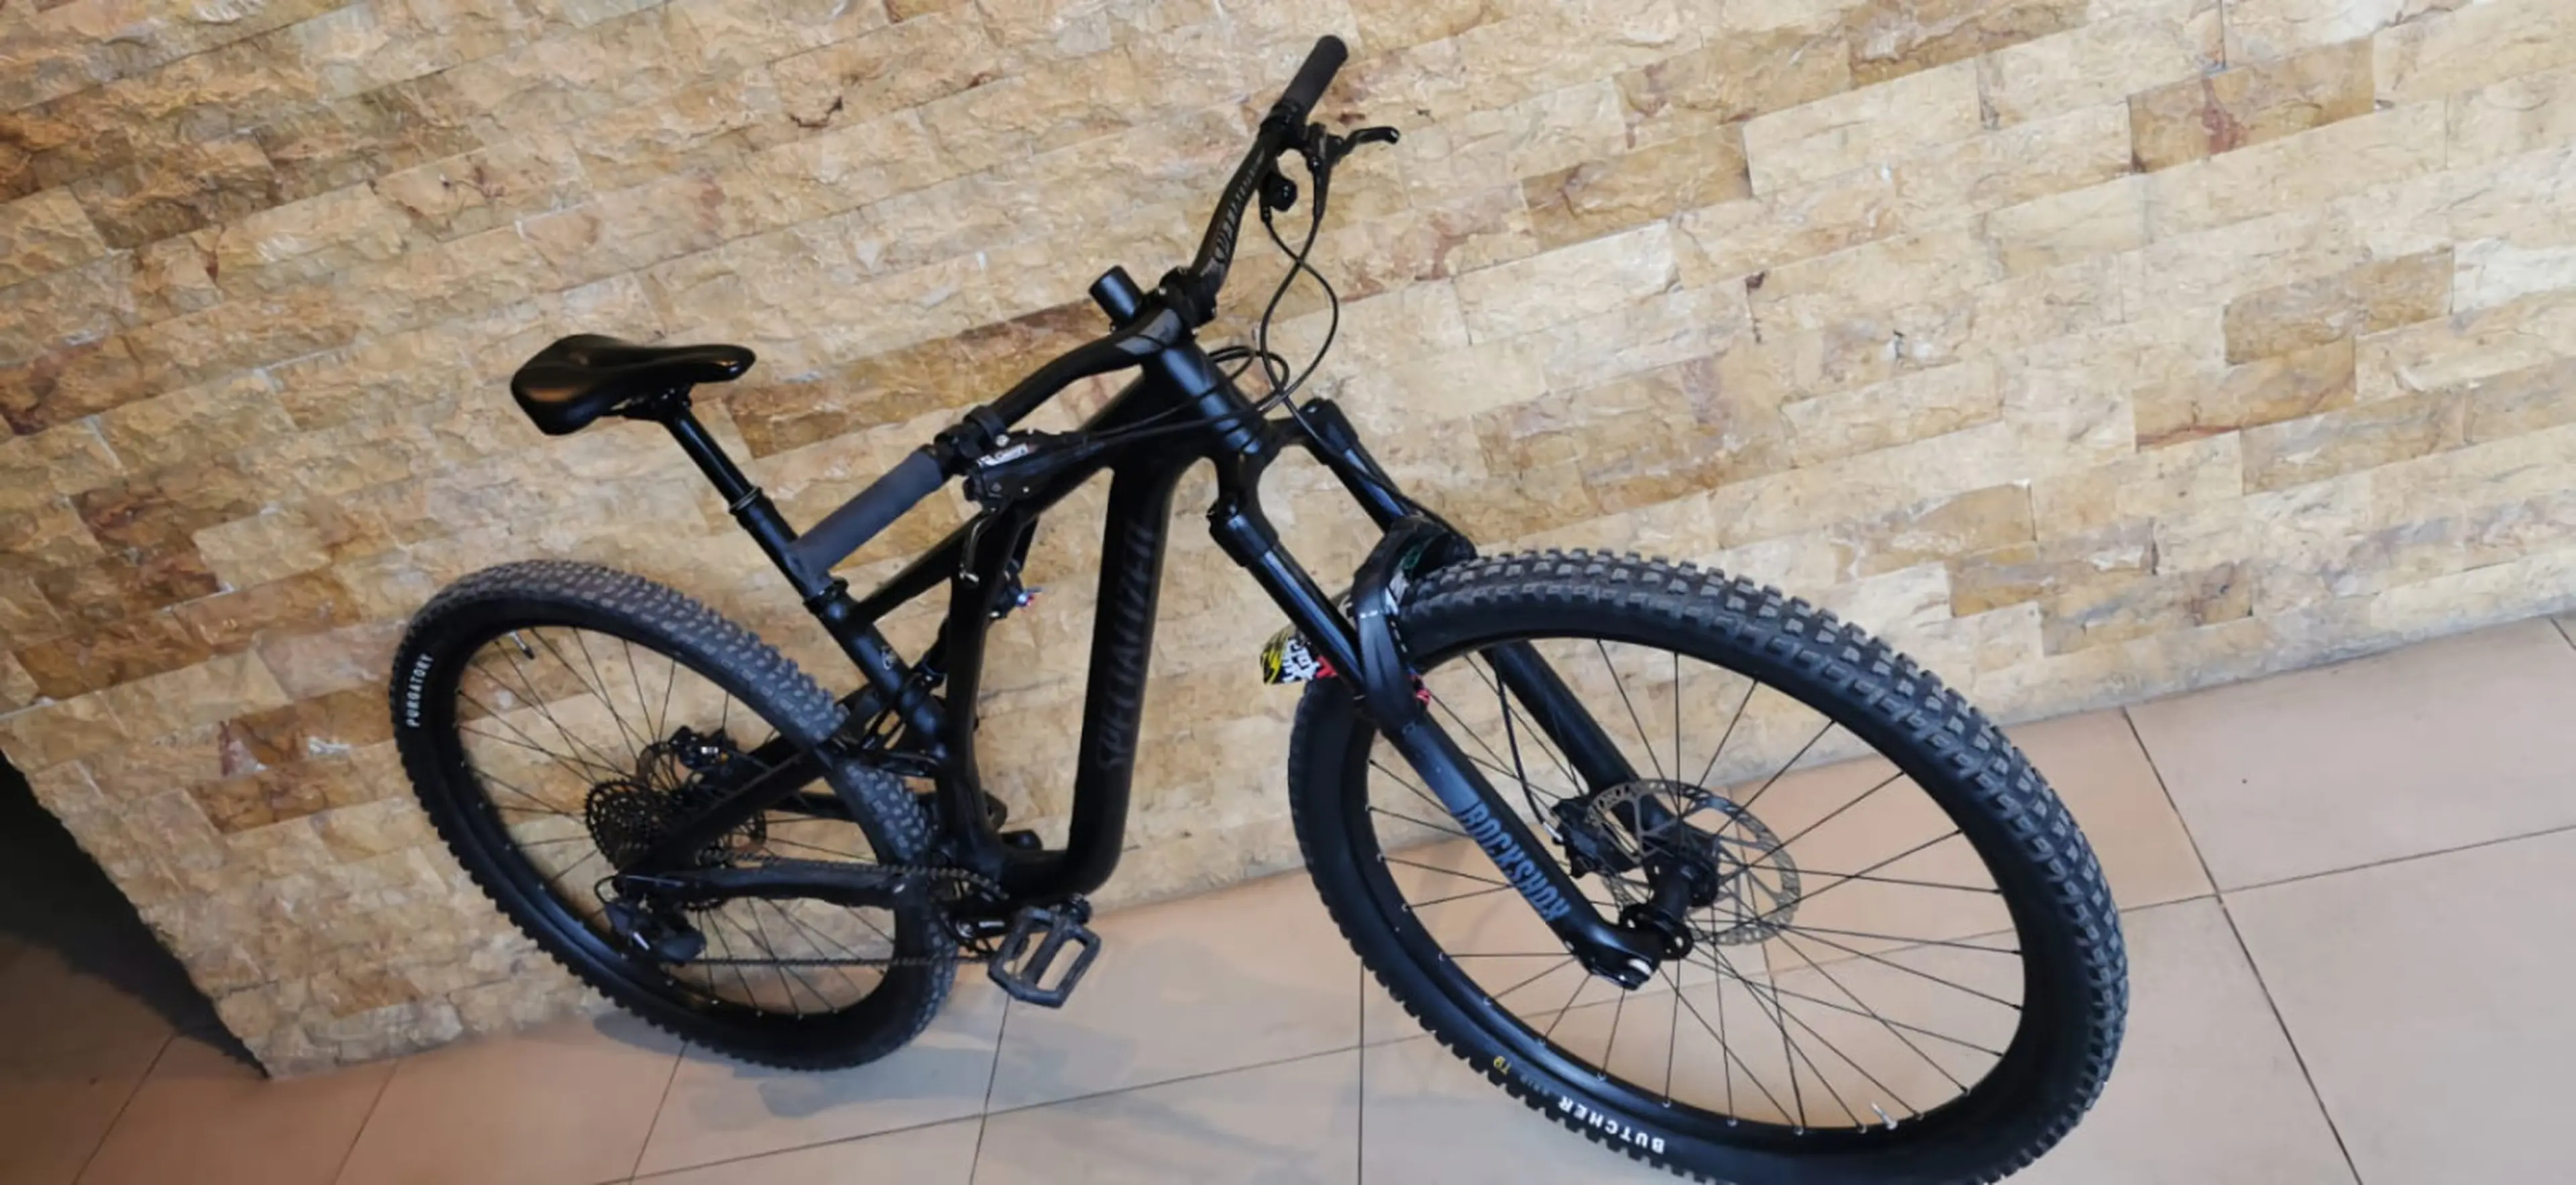 1. Specialized stumpjumper alloy